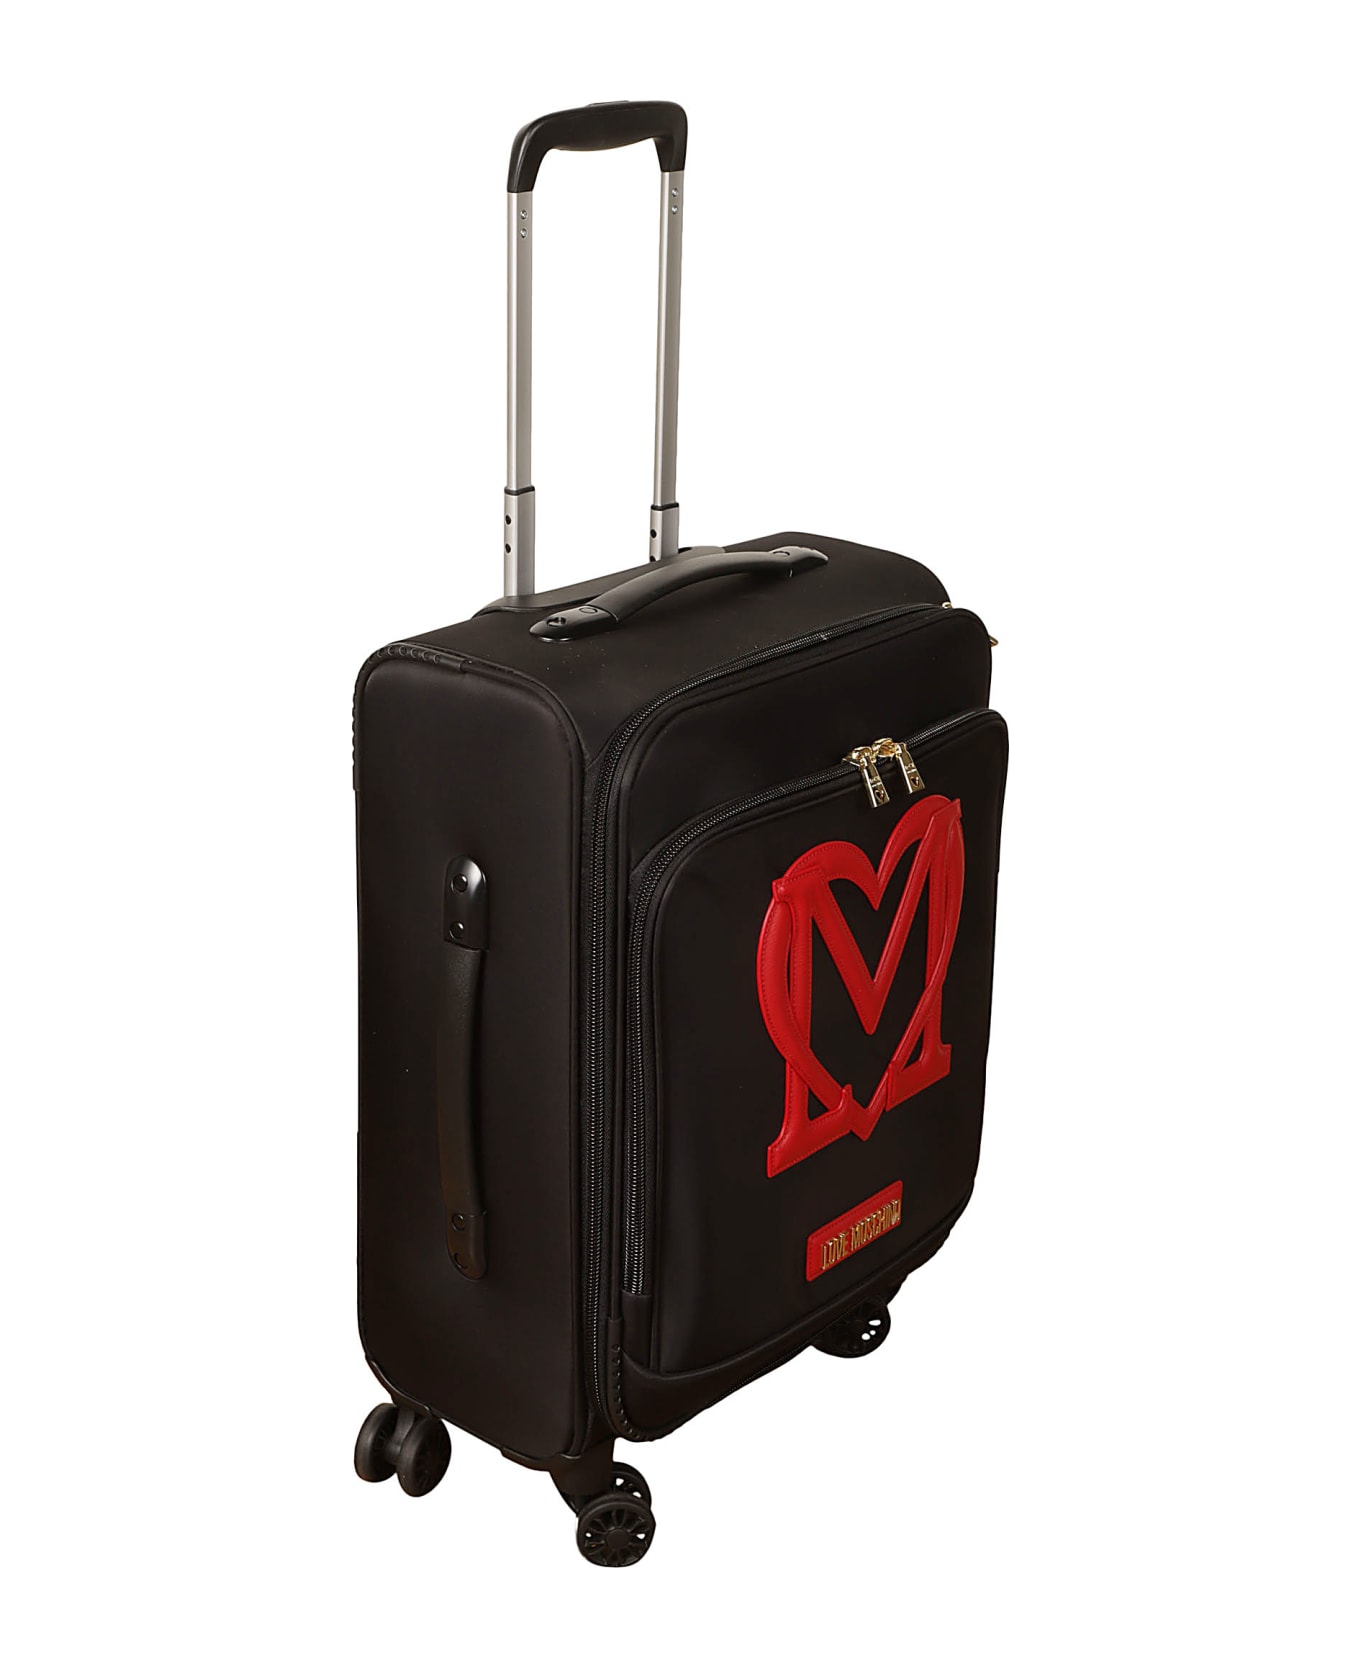 Love Moschino Heart Patched Two-way Zipped Trolley Luggage - Black/Red